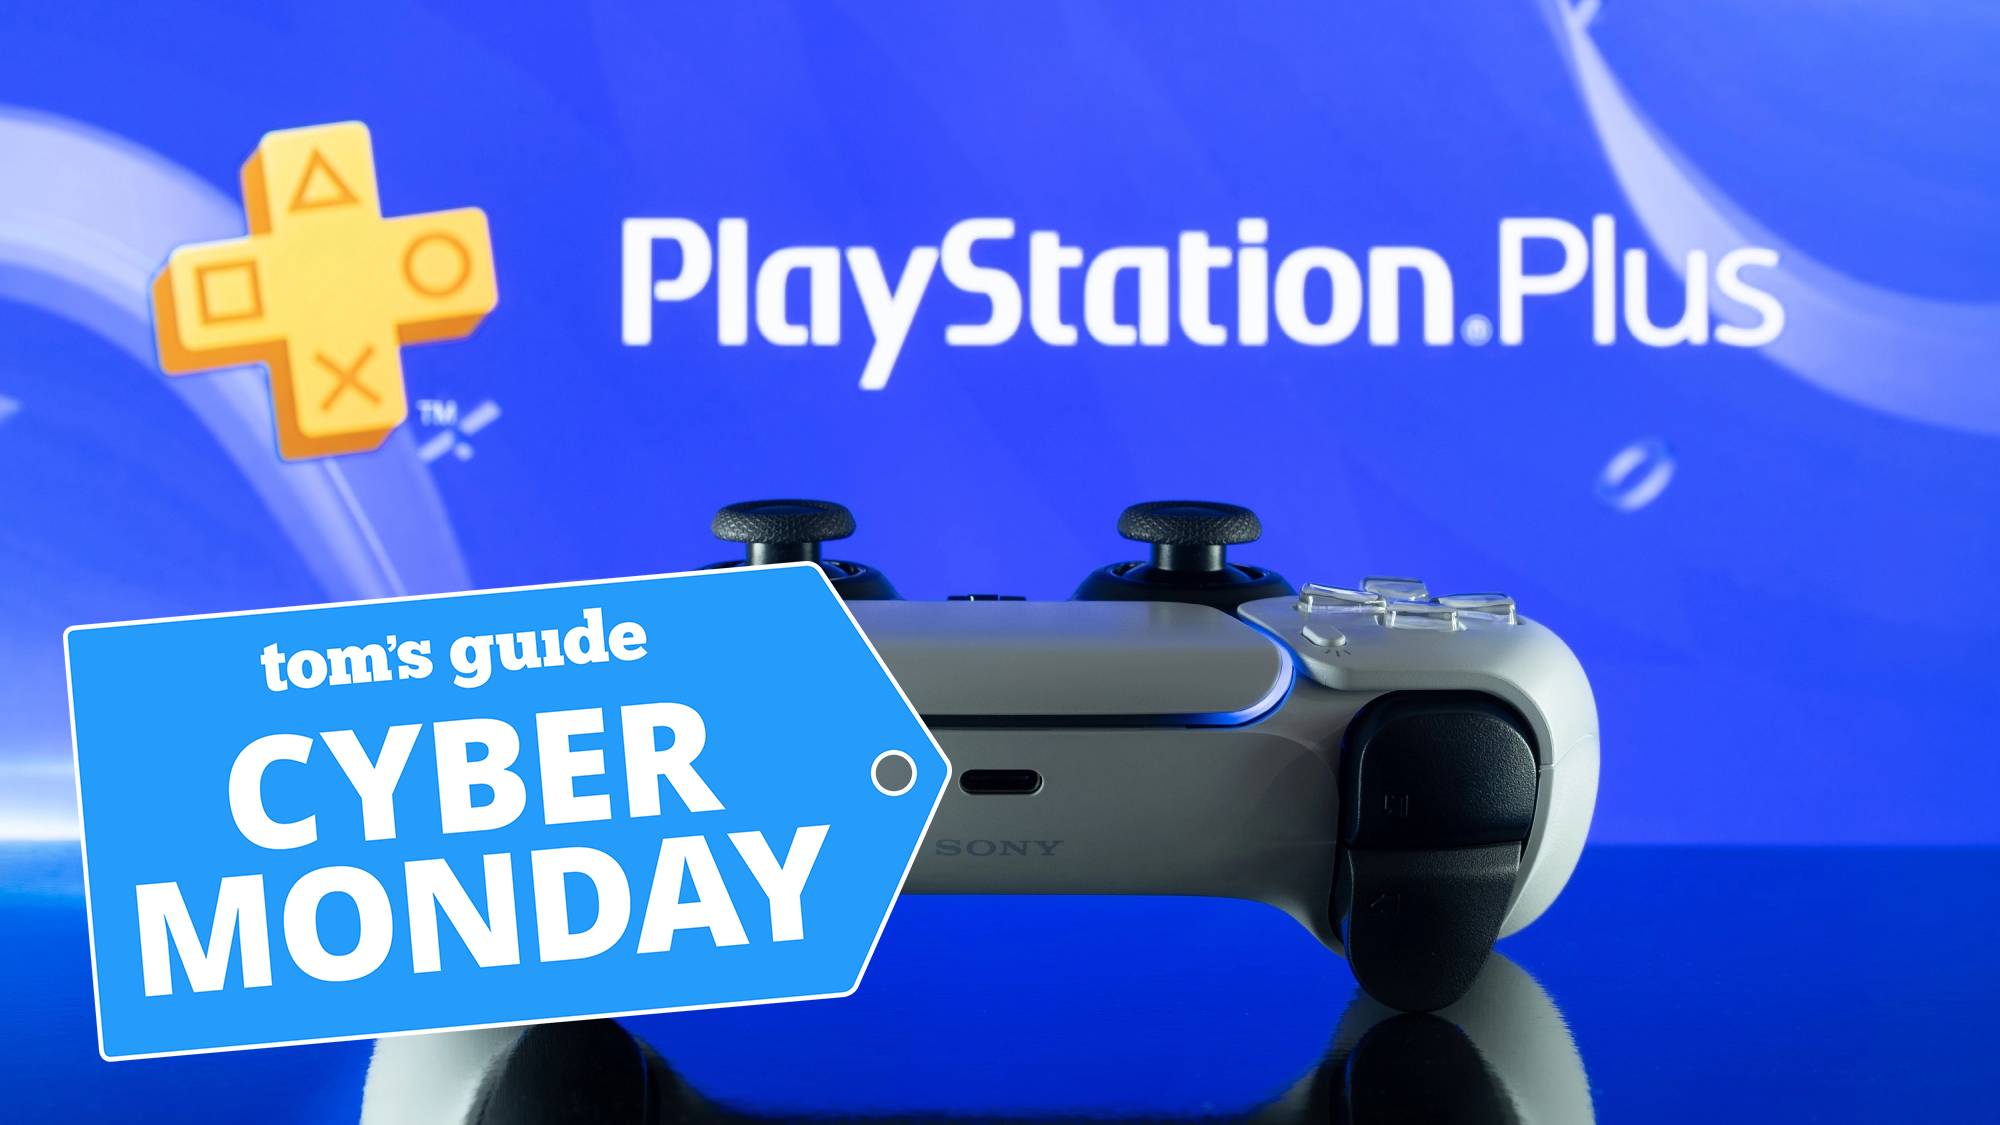 PlayStation Plus deal